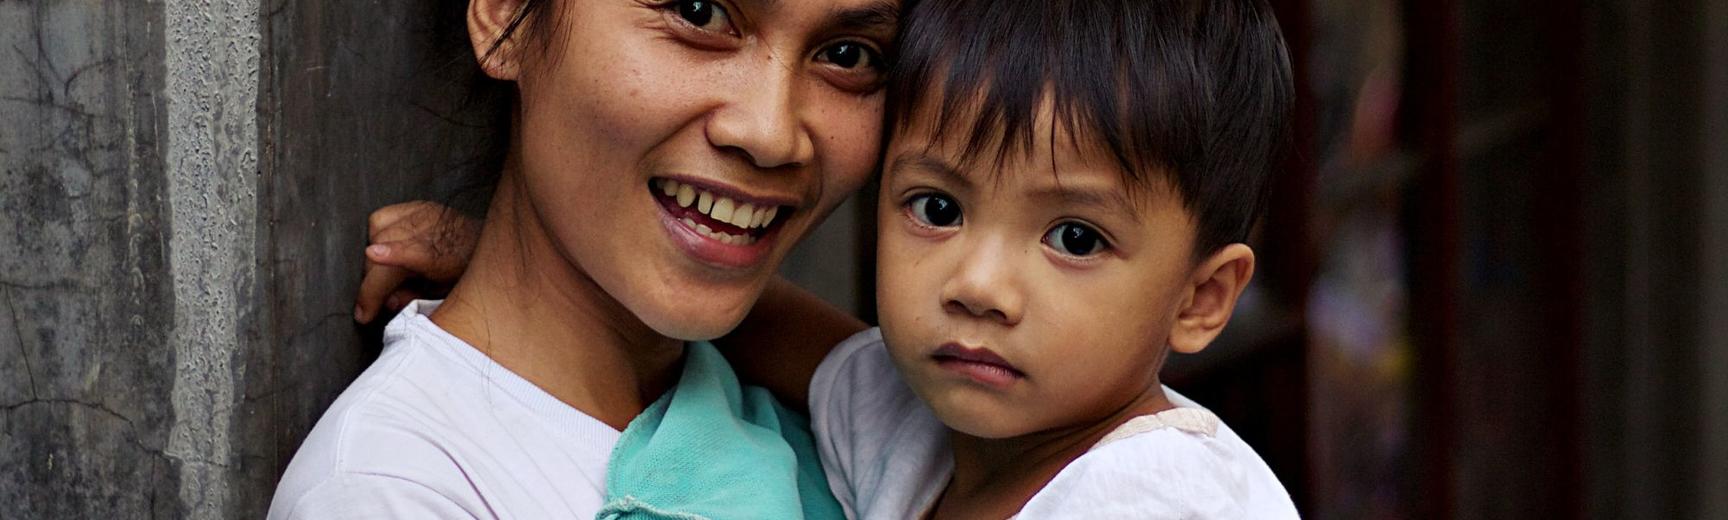 parenting within the social welfare system in the philippines